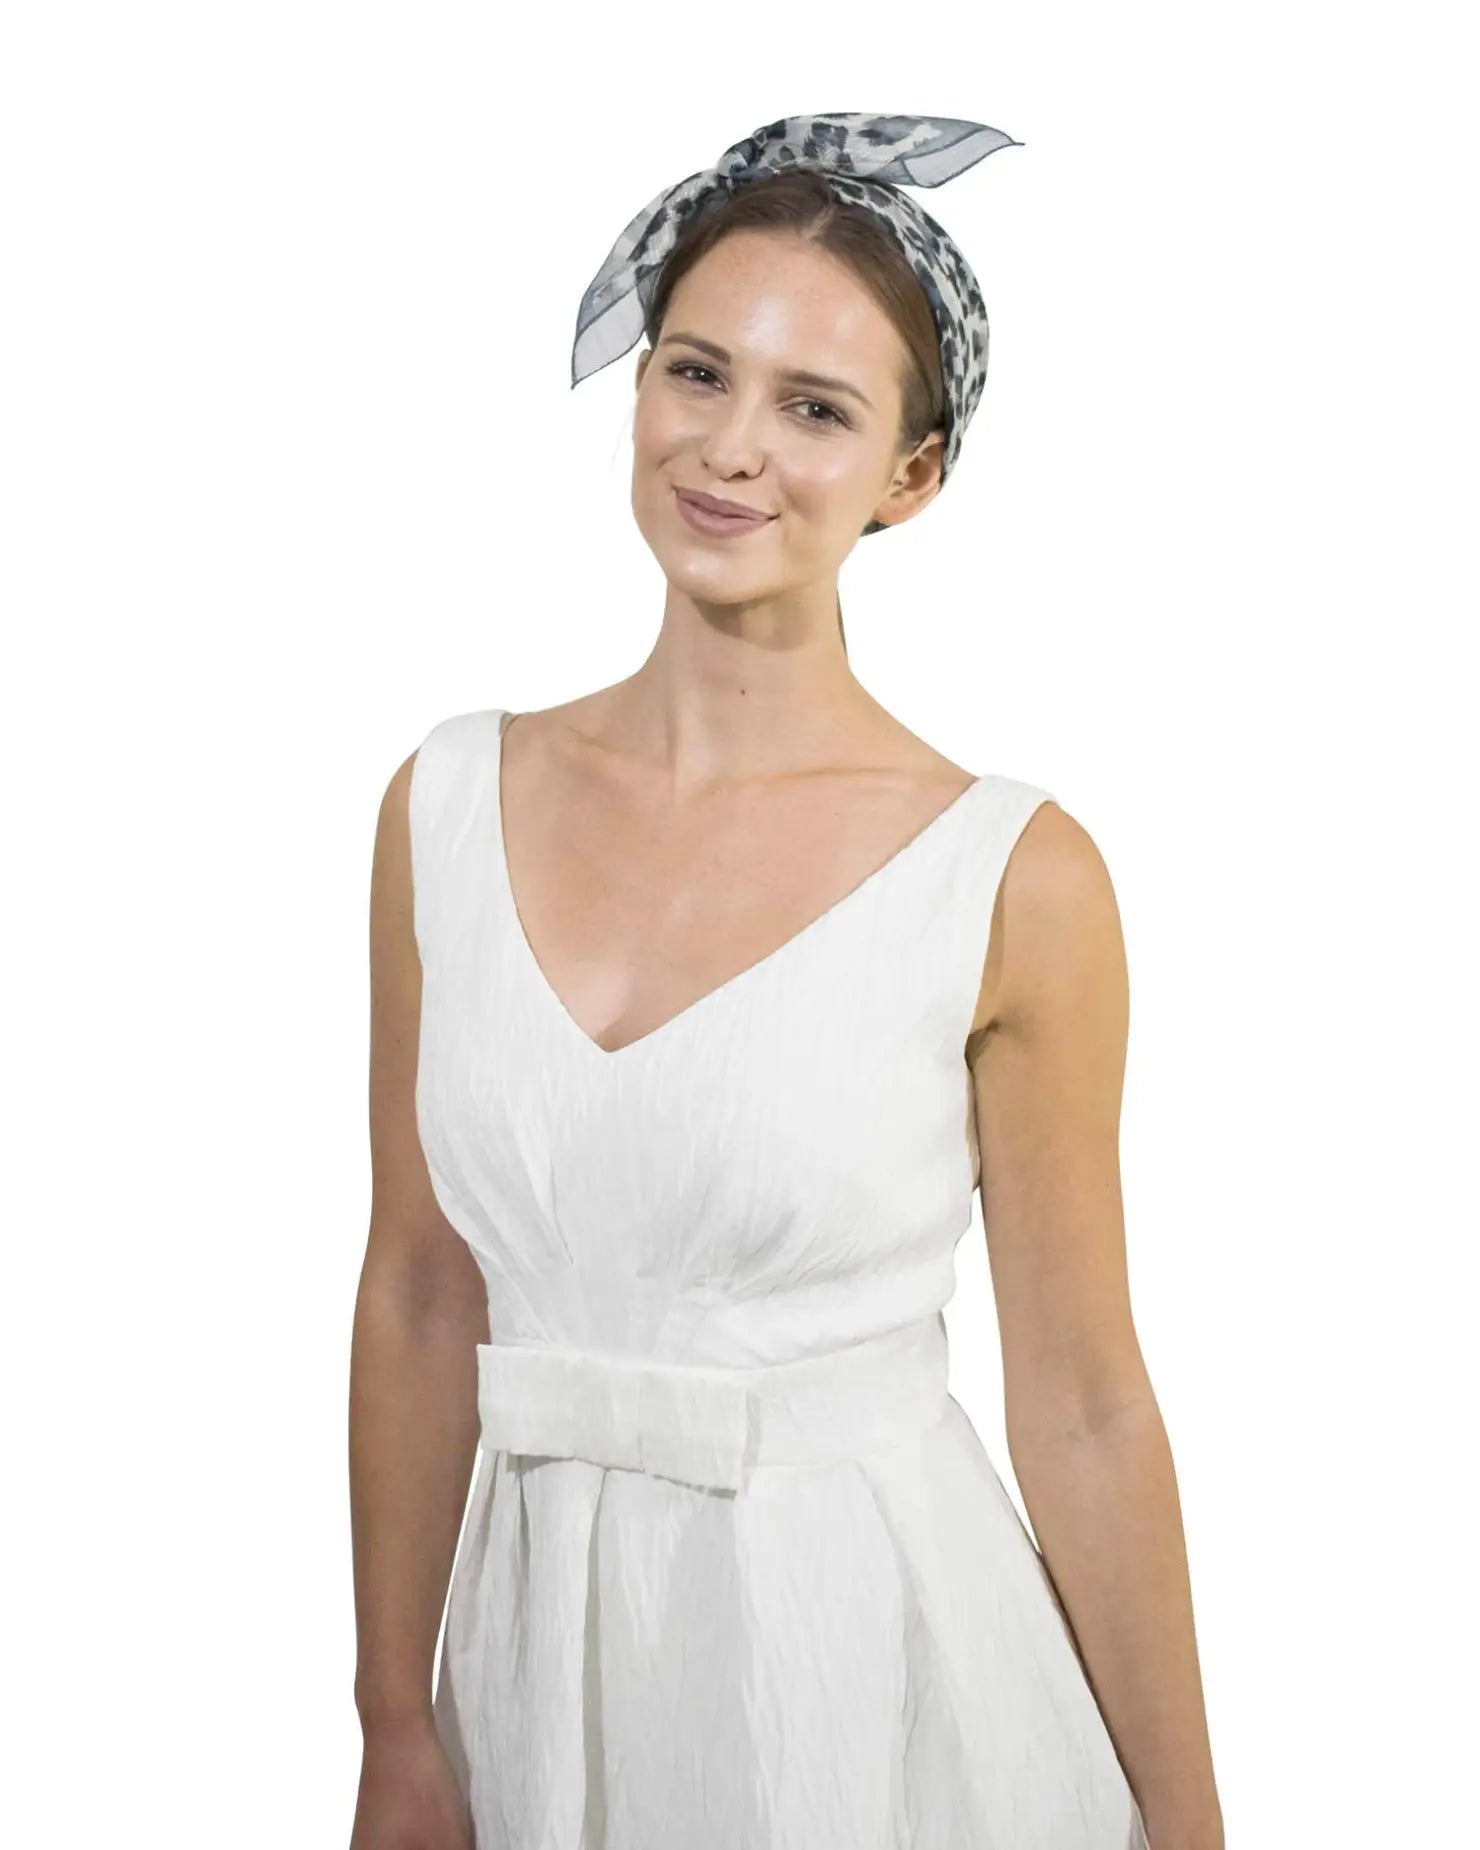 Woman in white dress and headband with Leopard Print Chiffon Square Neck Scarf.